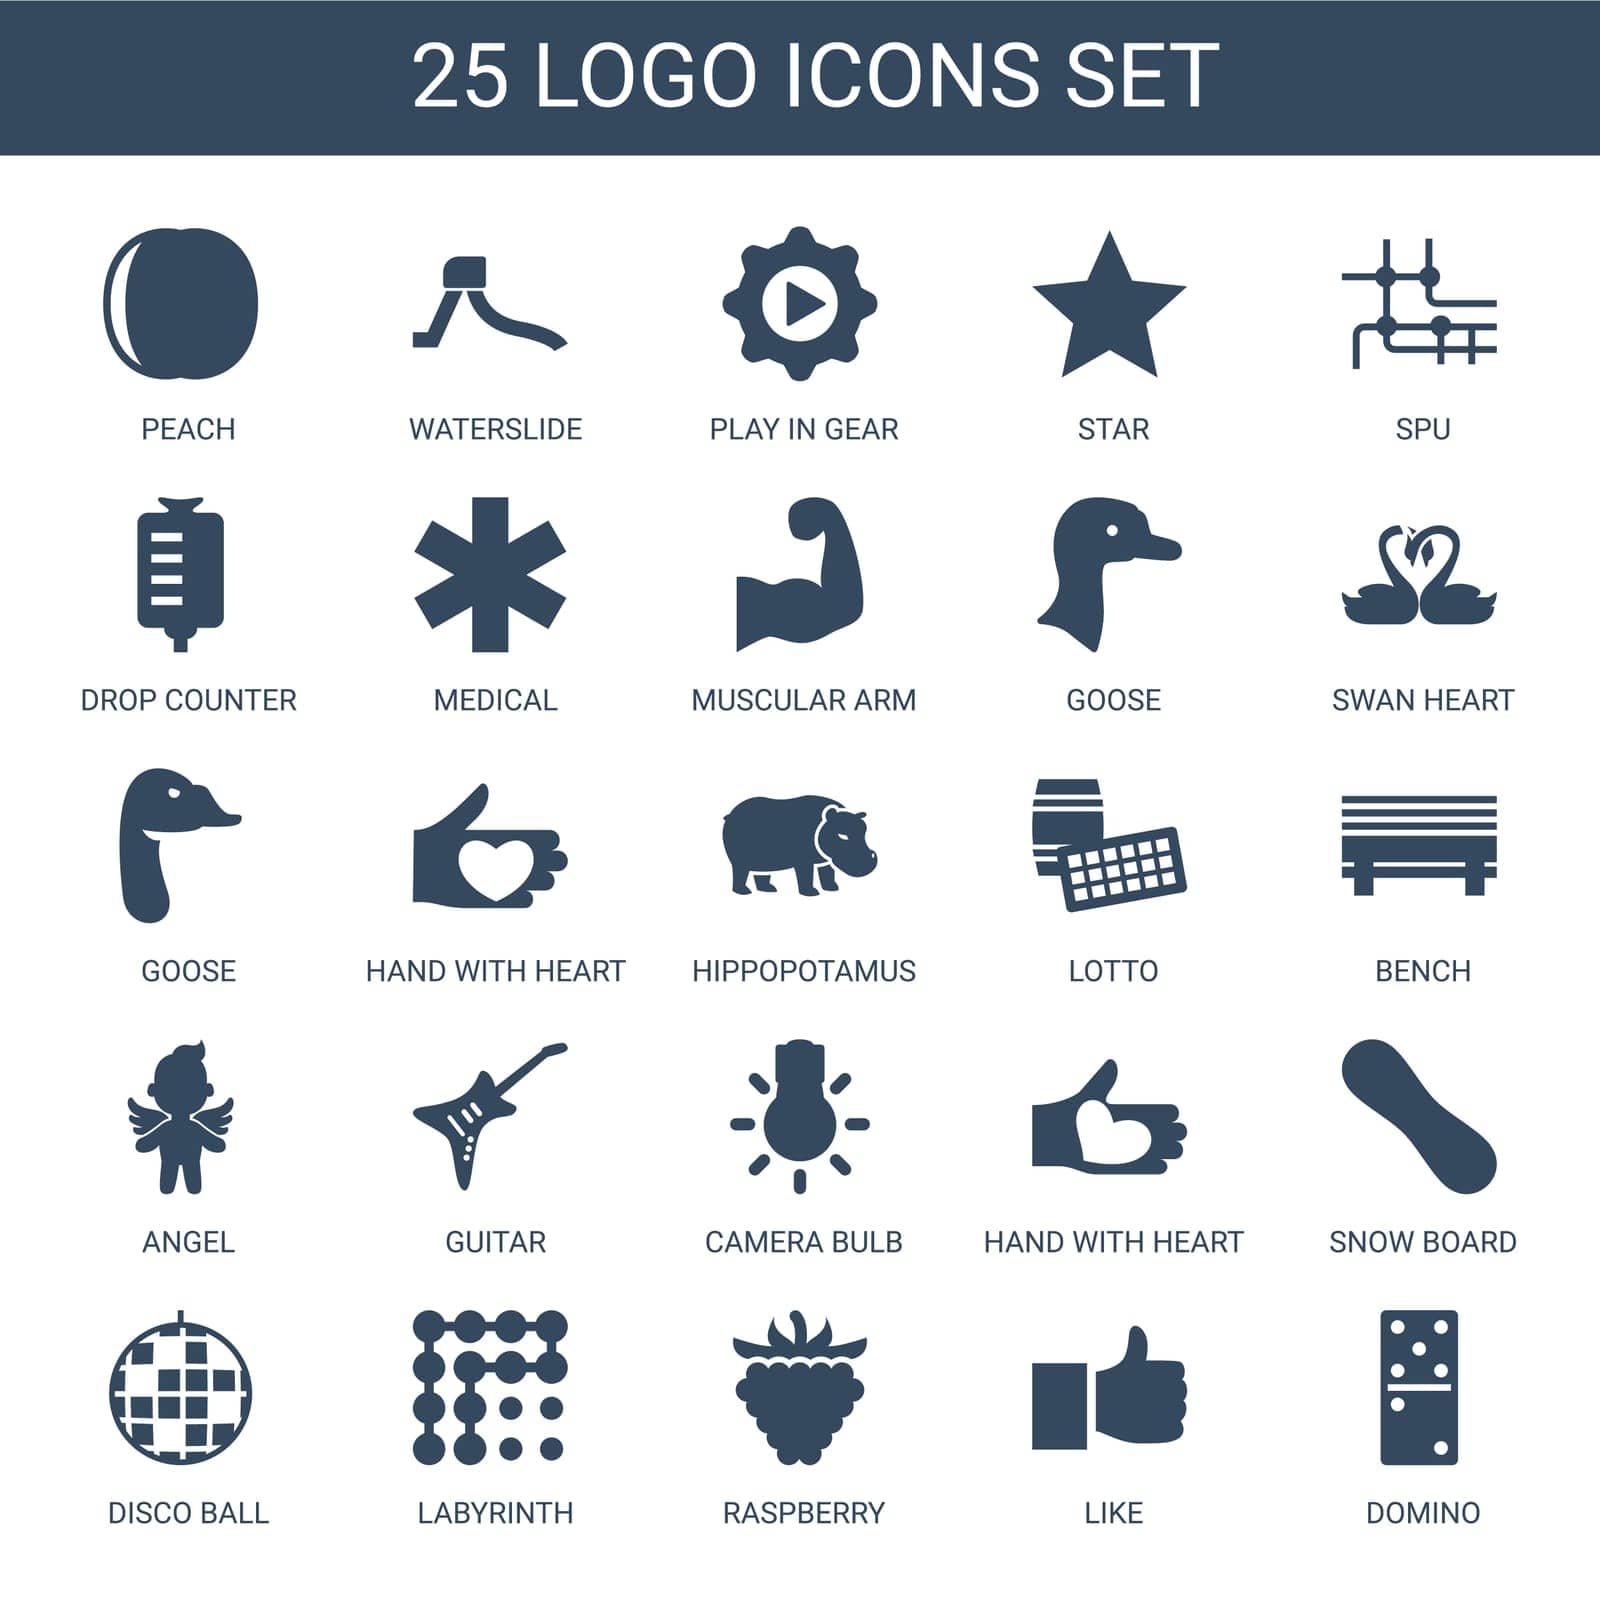 play,drop,muscular,symbol,medical,waterslide,goose,icon,sign,disco,isolated,angel,ball,white,design,logo,vector,domino,camera,arm,hand,raspberry,set,star,bench,like,in,bulb,swan,peach,lotto,counter,heart,guitar,hippopotamus,with,snow,background,spu,labyrinth,illustration,board,gear